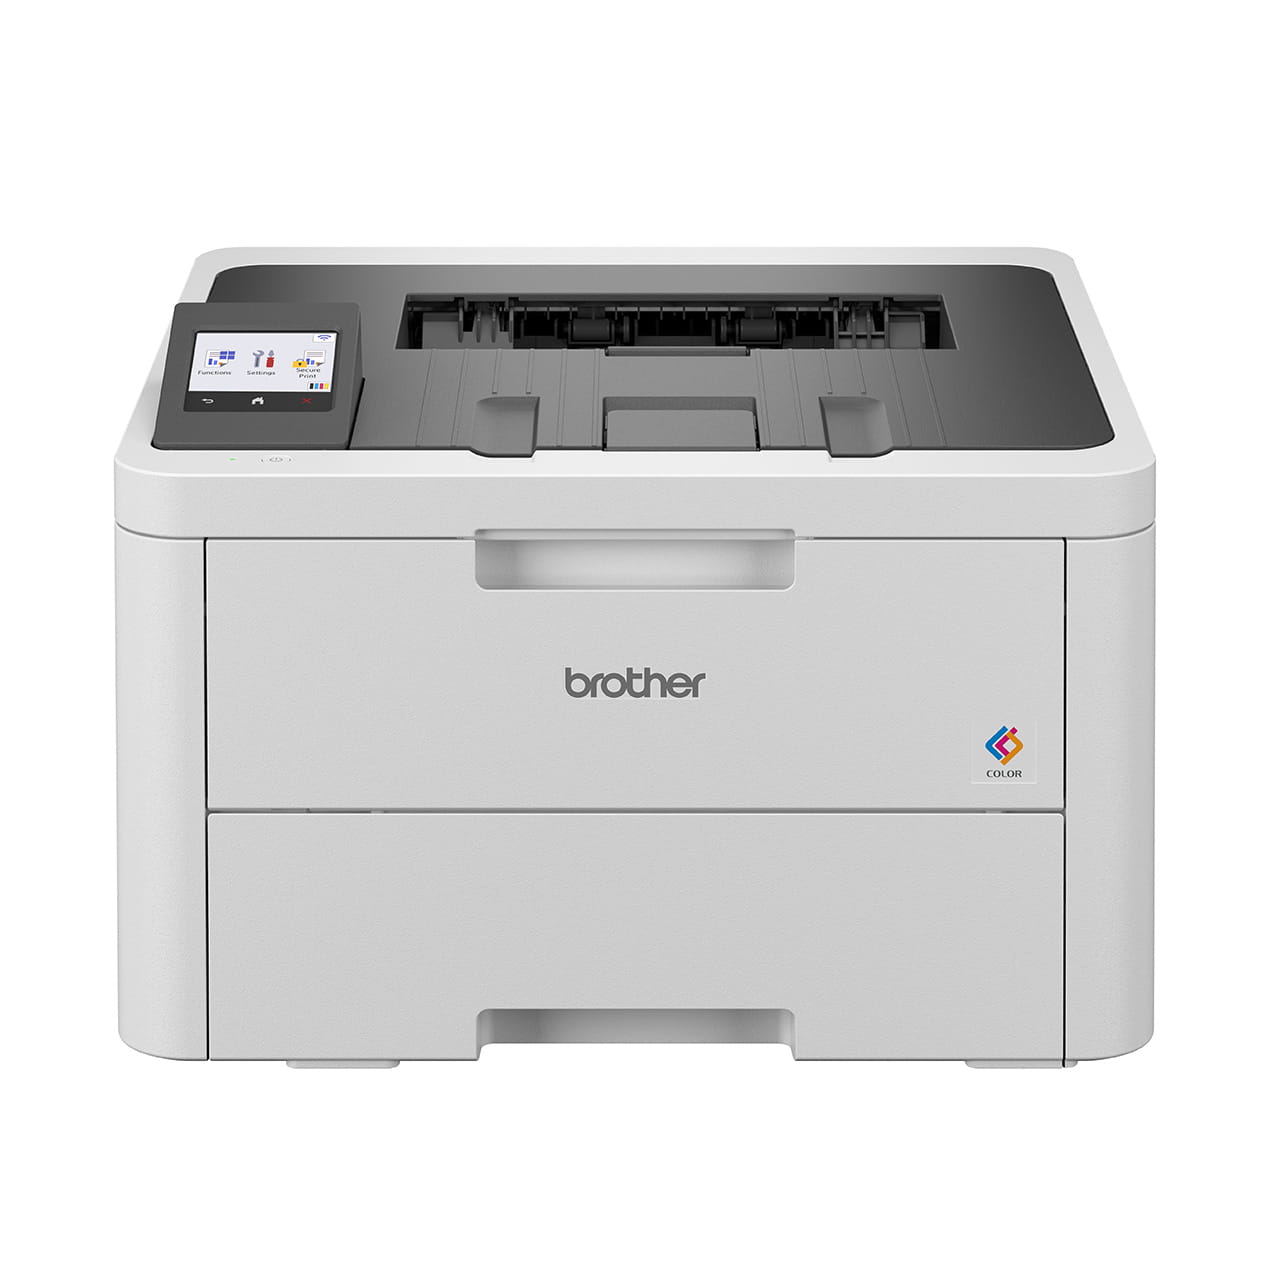 Brother HL-L3280CDW Colour Laser Printer Front View